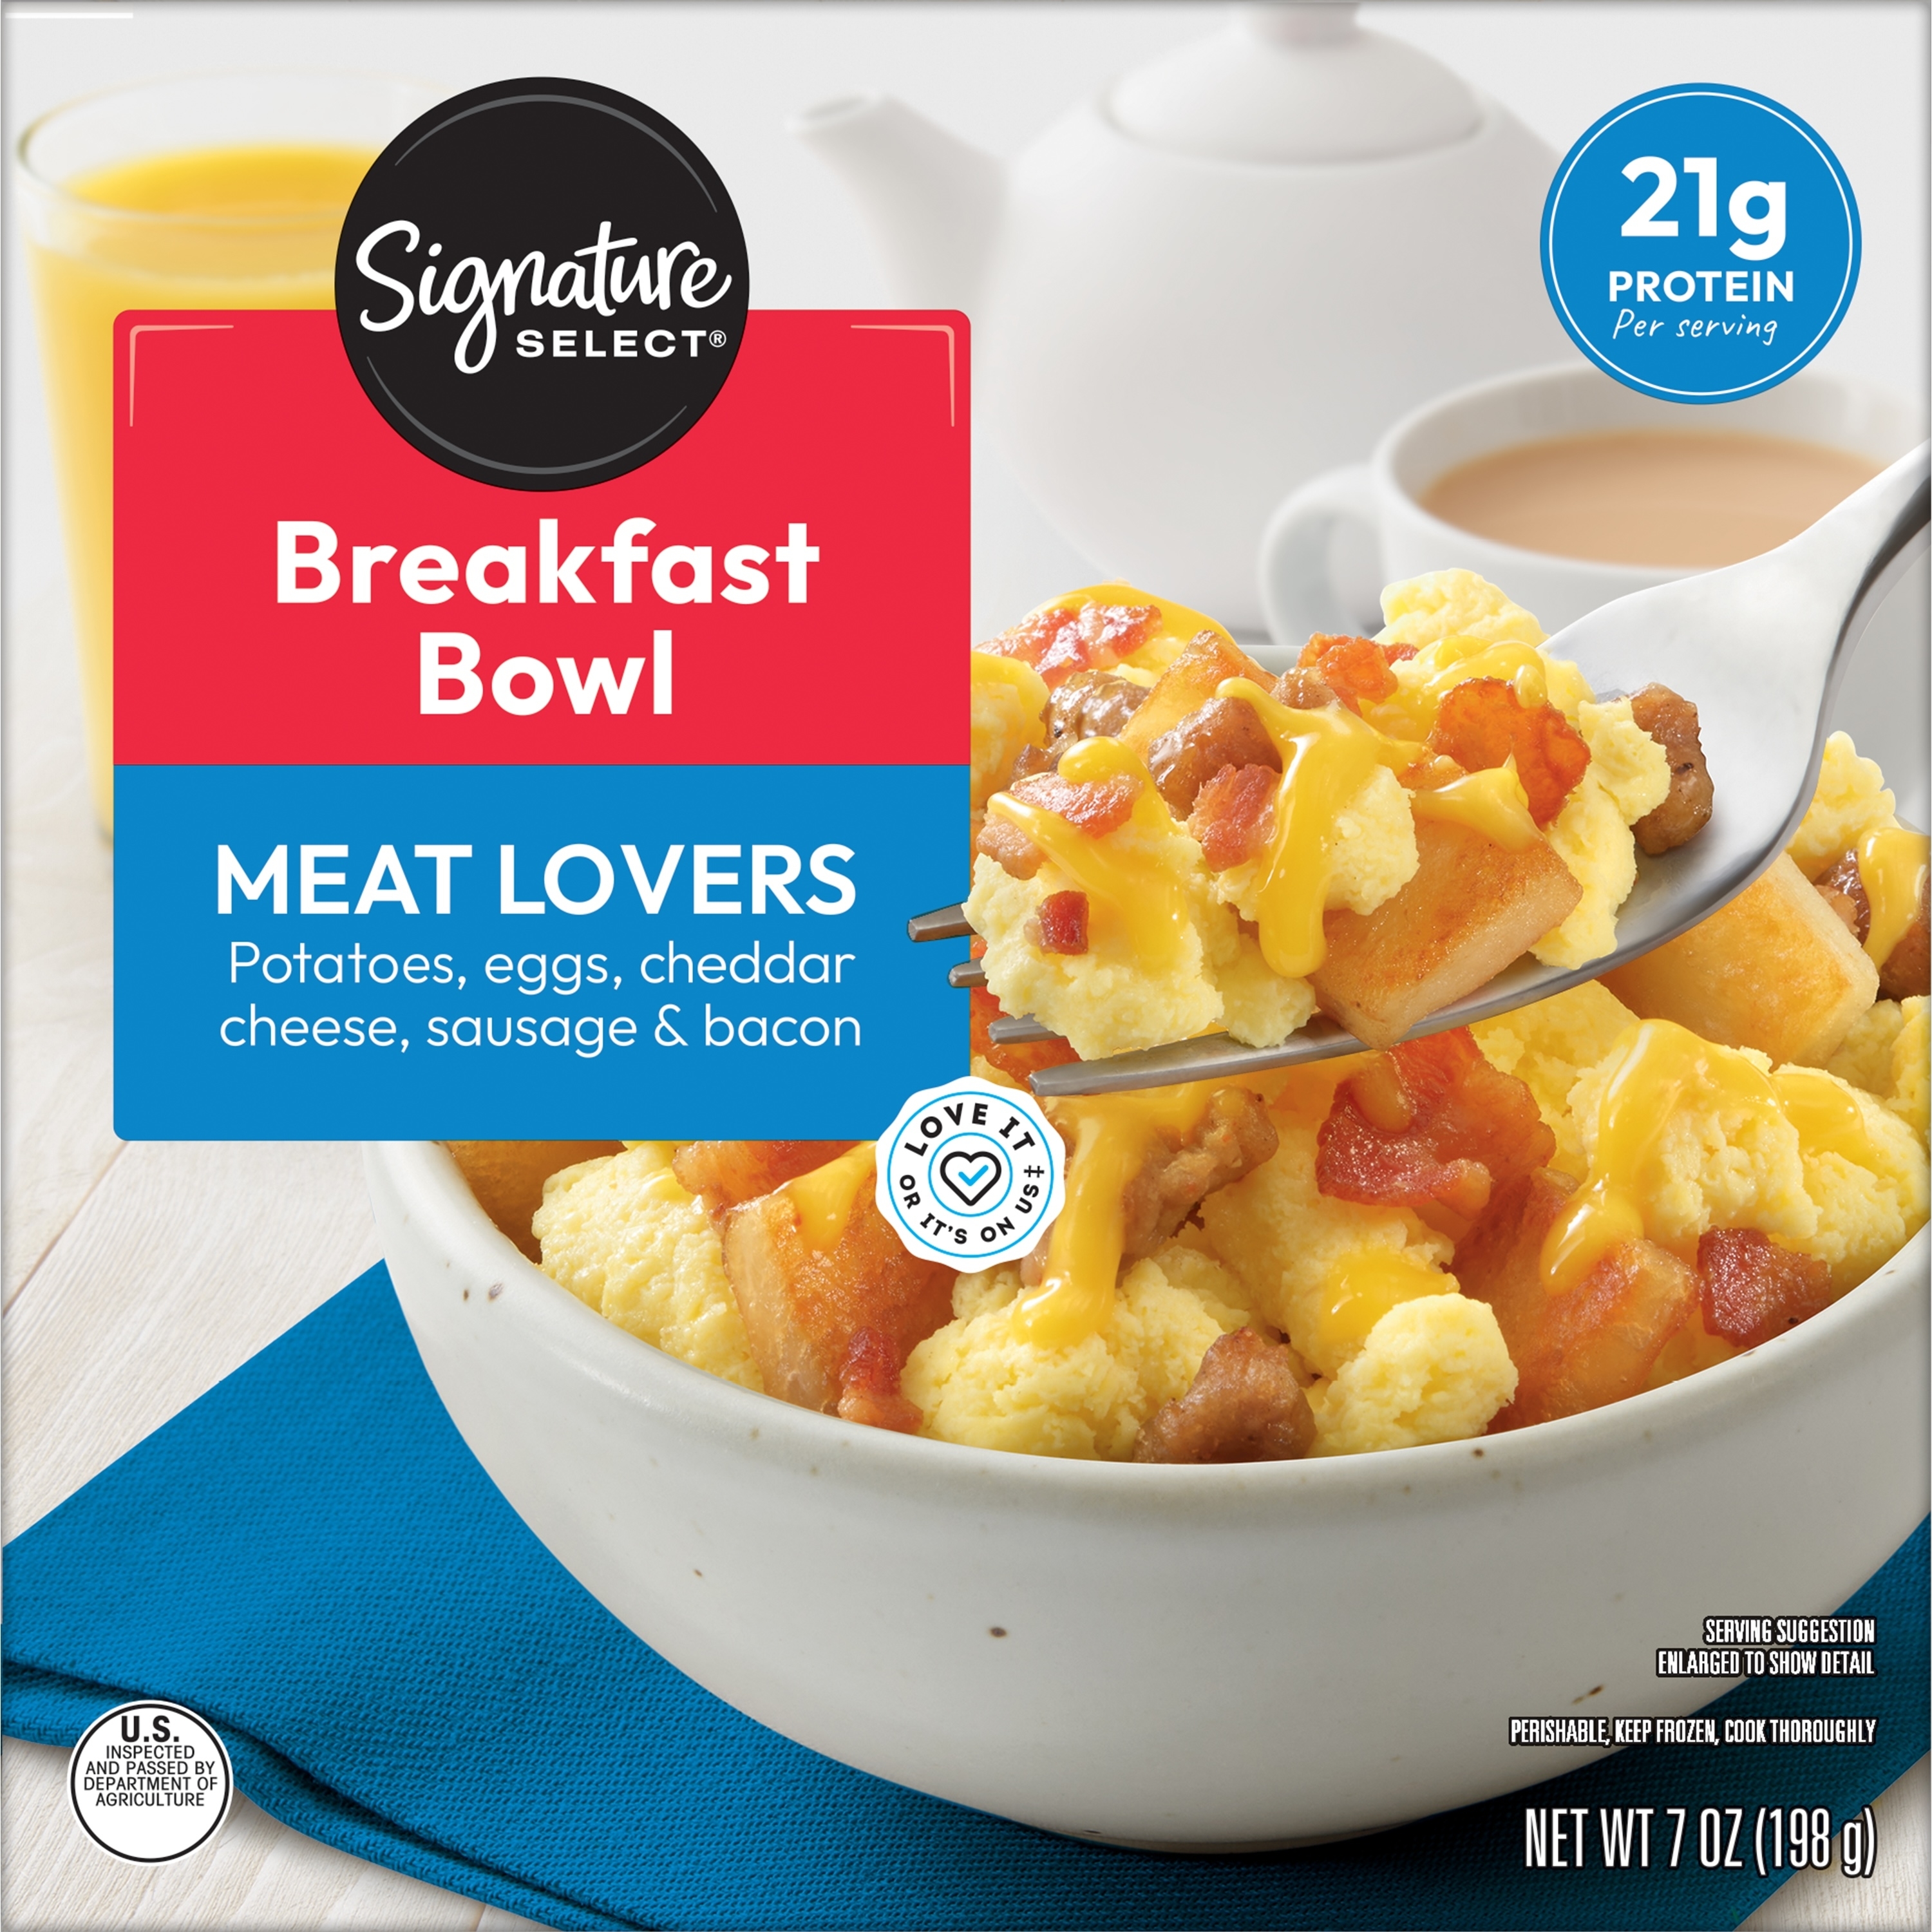 Advertisement for Signature Select Breakfast Bowl with potatoes, eggs, cheese, sausage, bacon, and 21g protein